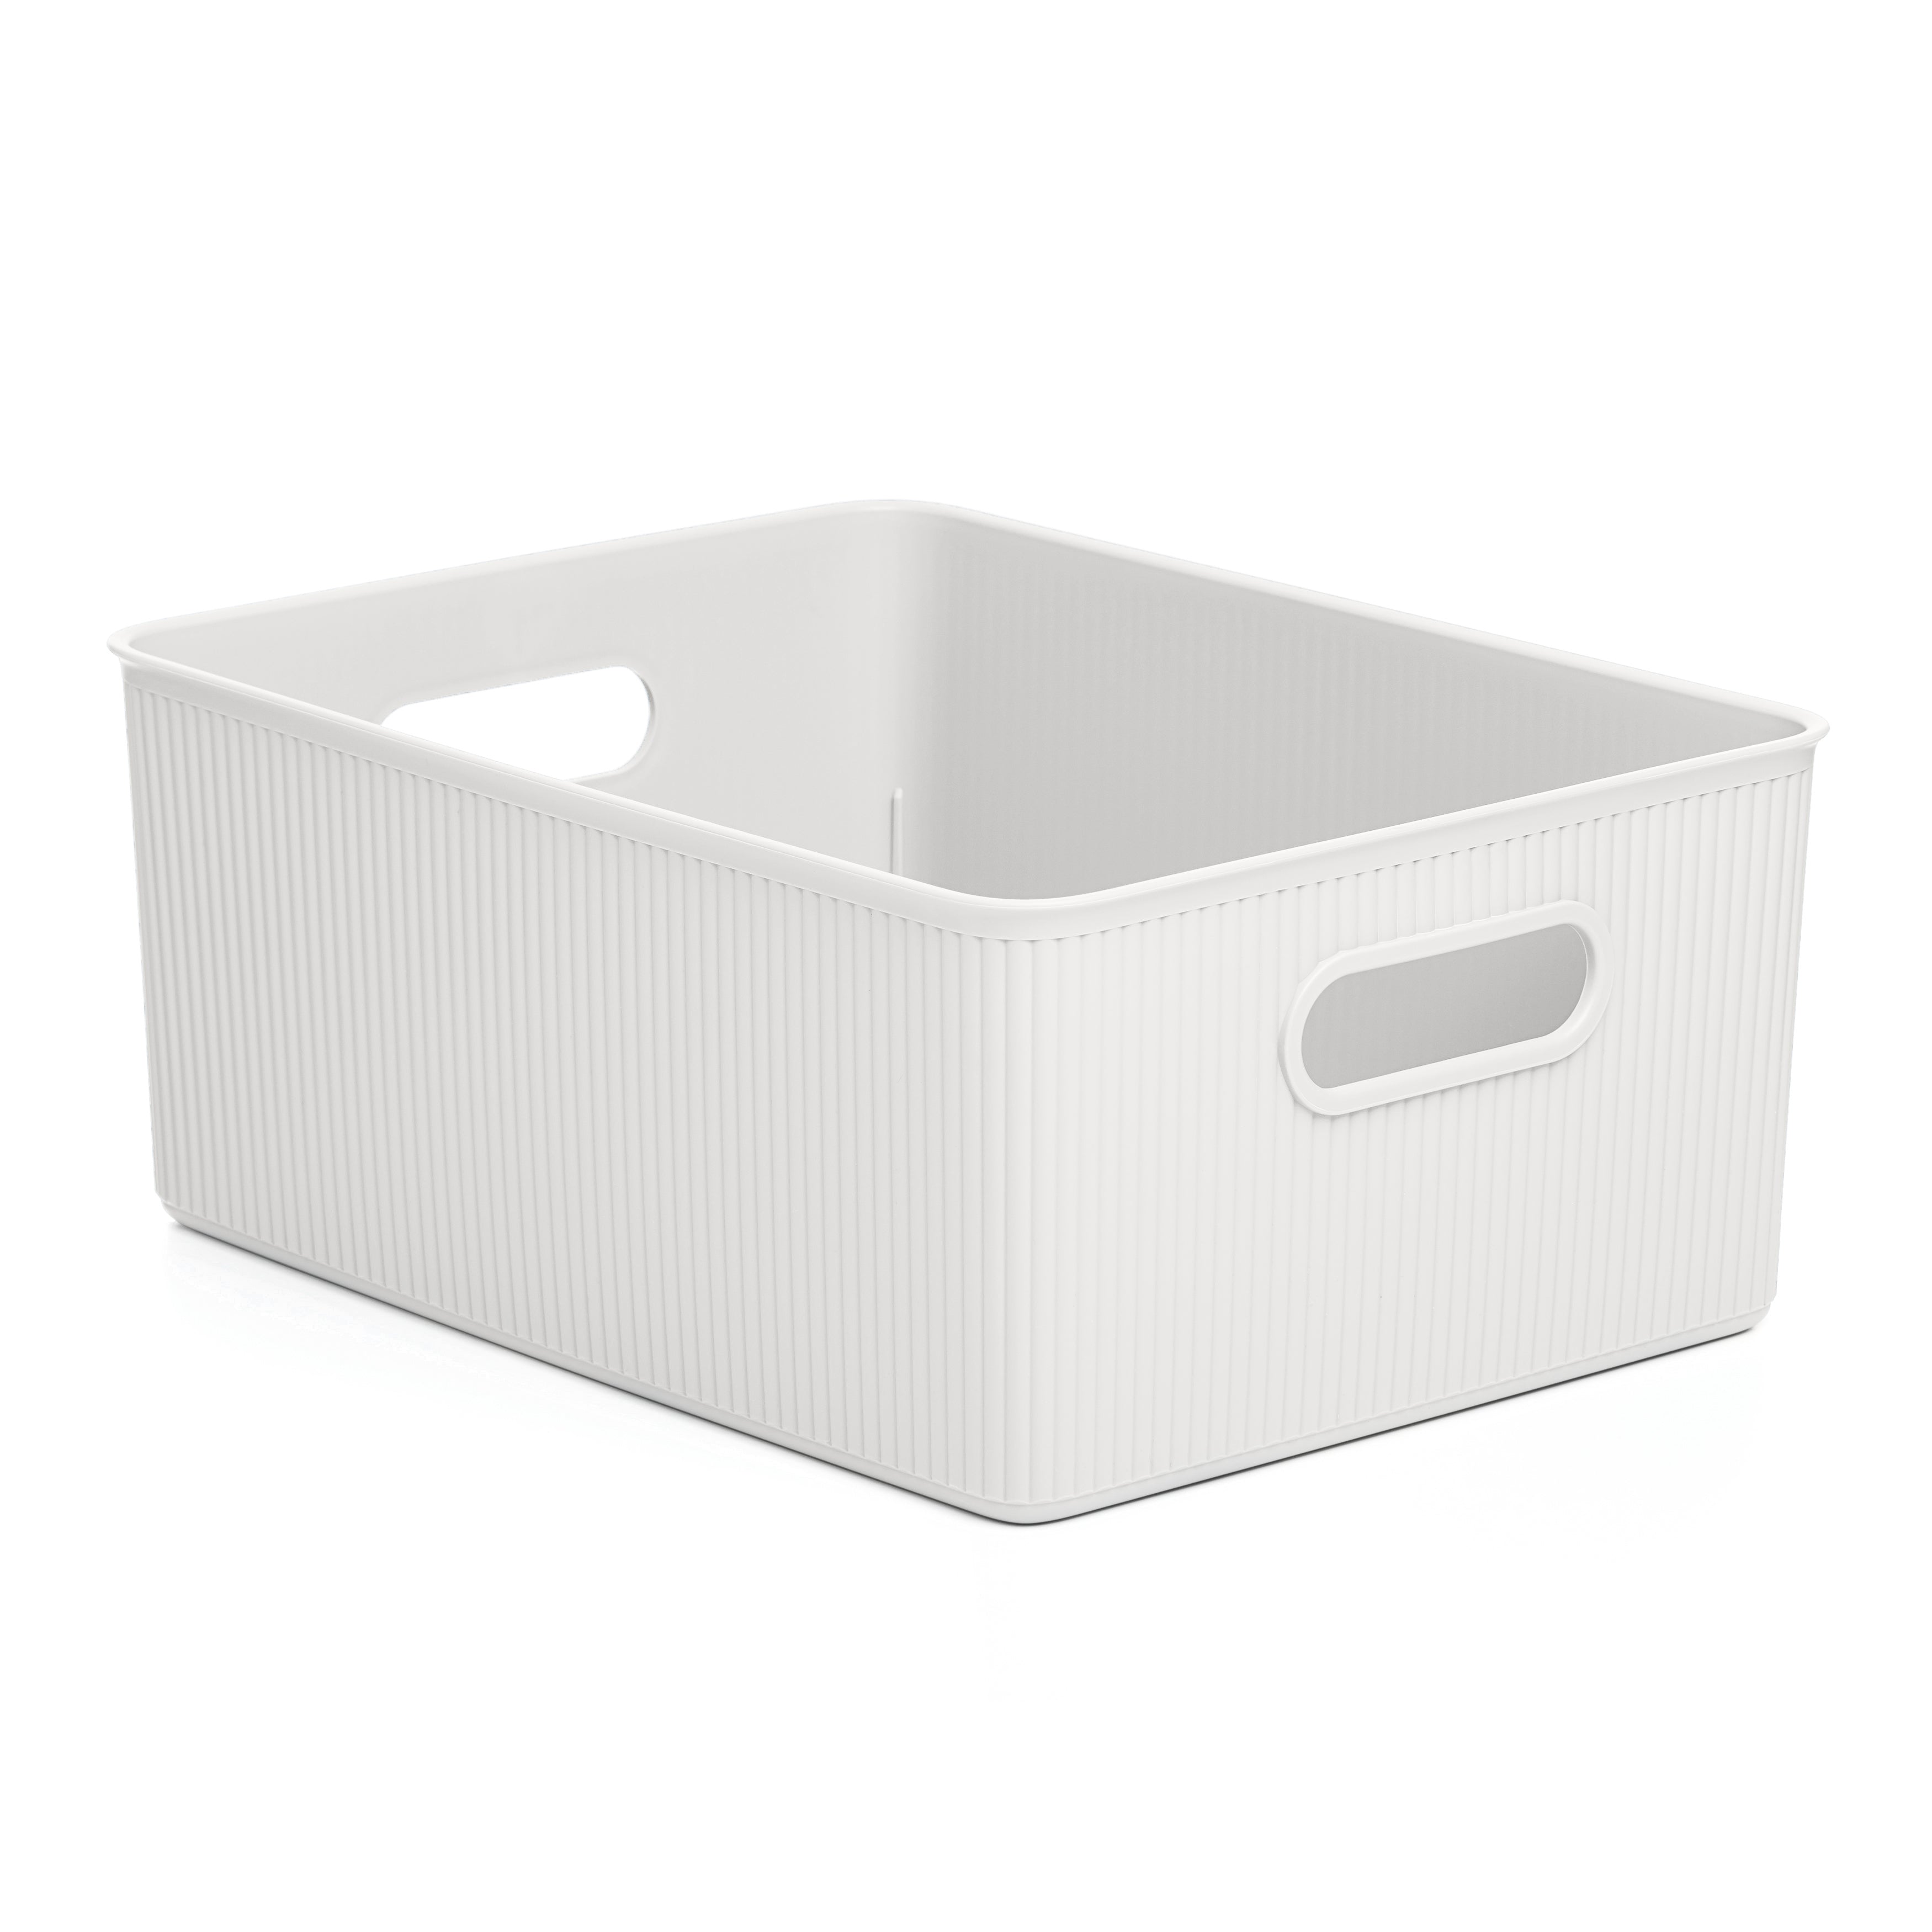 Superio Ribbed Collection - Decorative Plastic Open Home Storage Bins  Organizer Baskets, Medium White (2 Pack) Container Boxes for Organizing  Closet